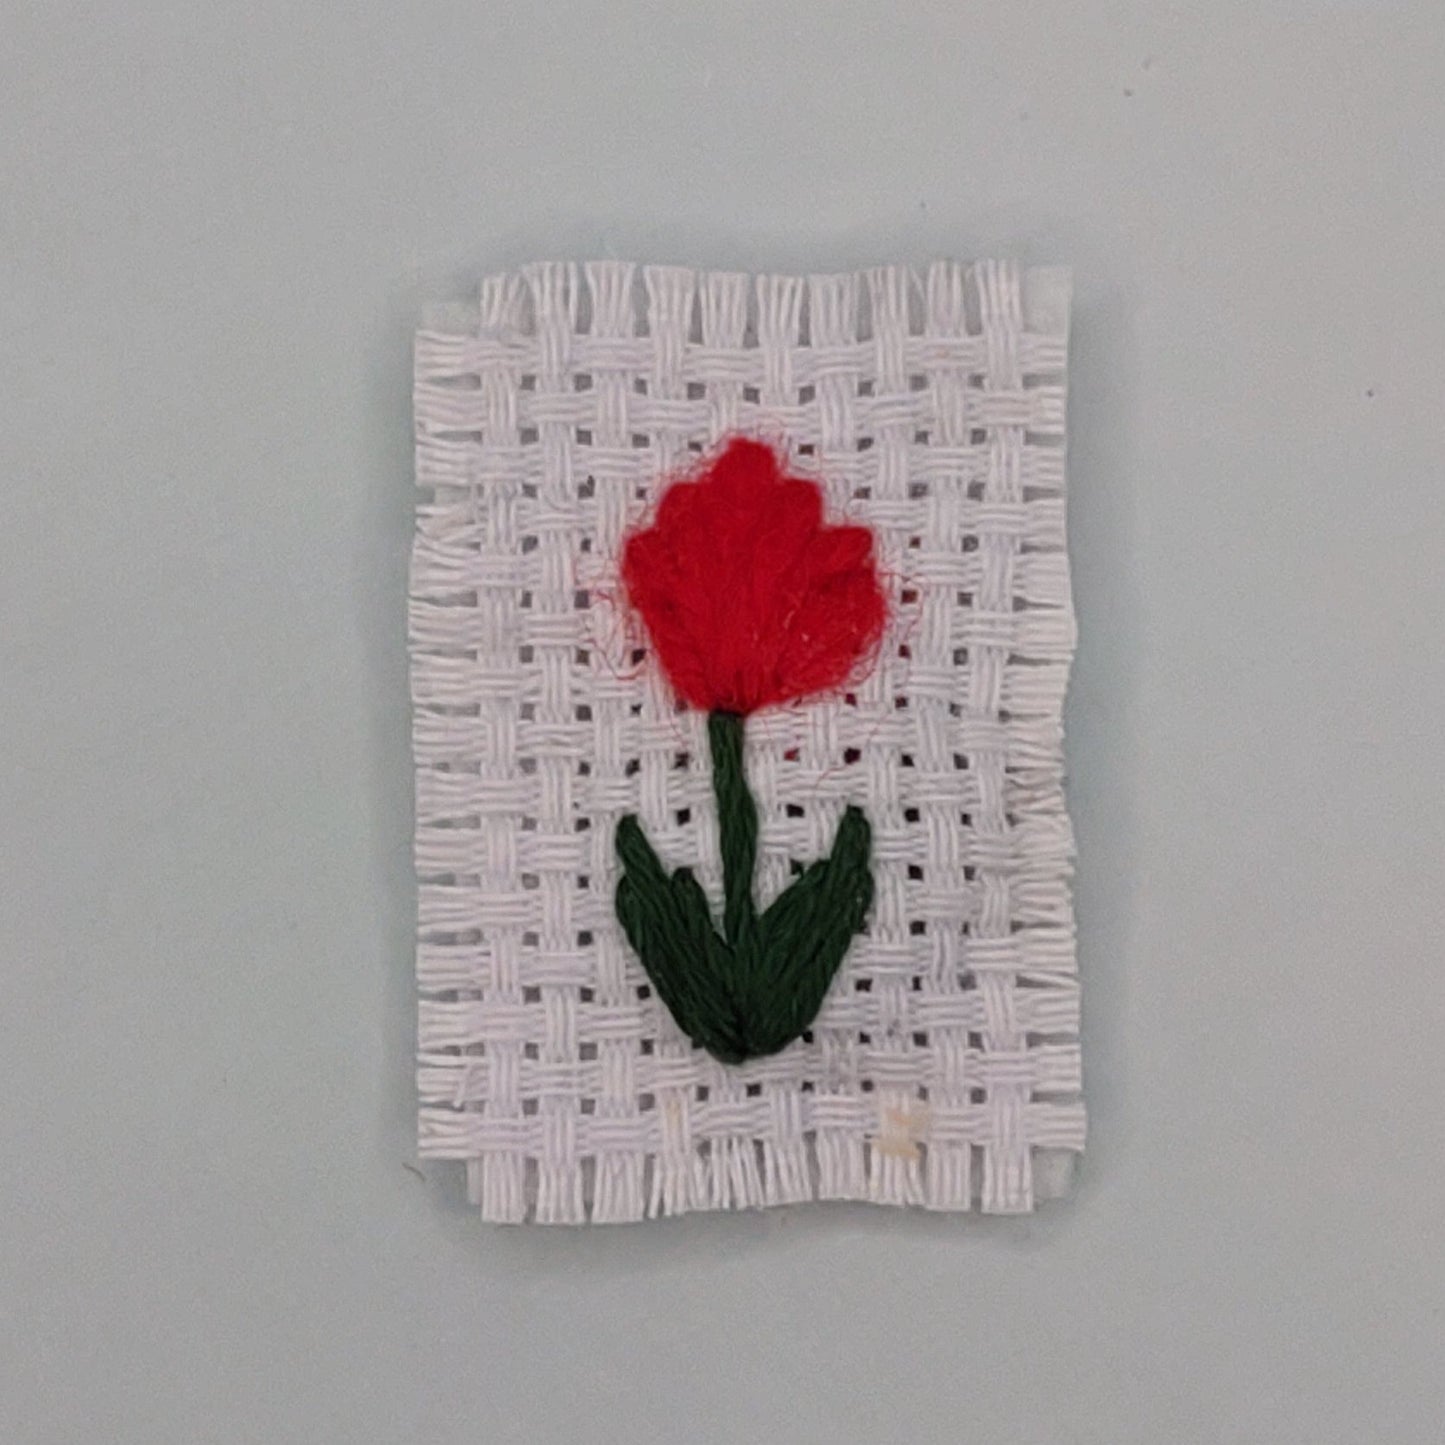 Flower - Caring Magnets - Handmade Embroidery